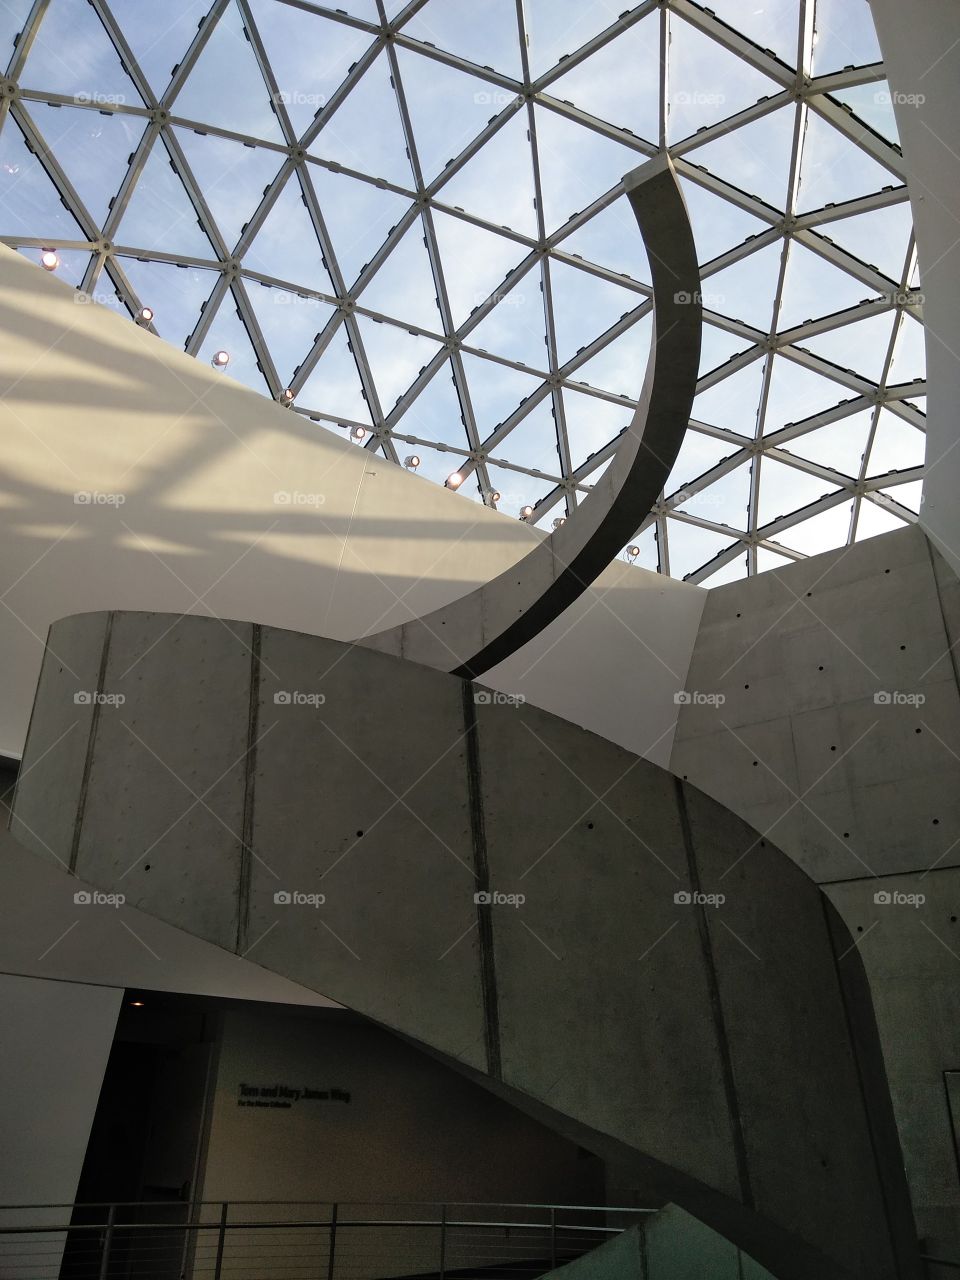 Top of stairs - Dali Museum